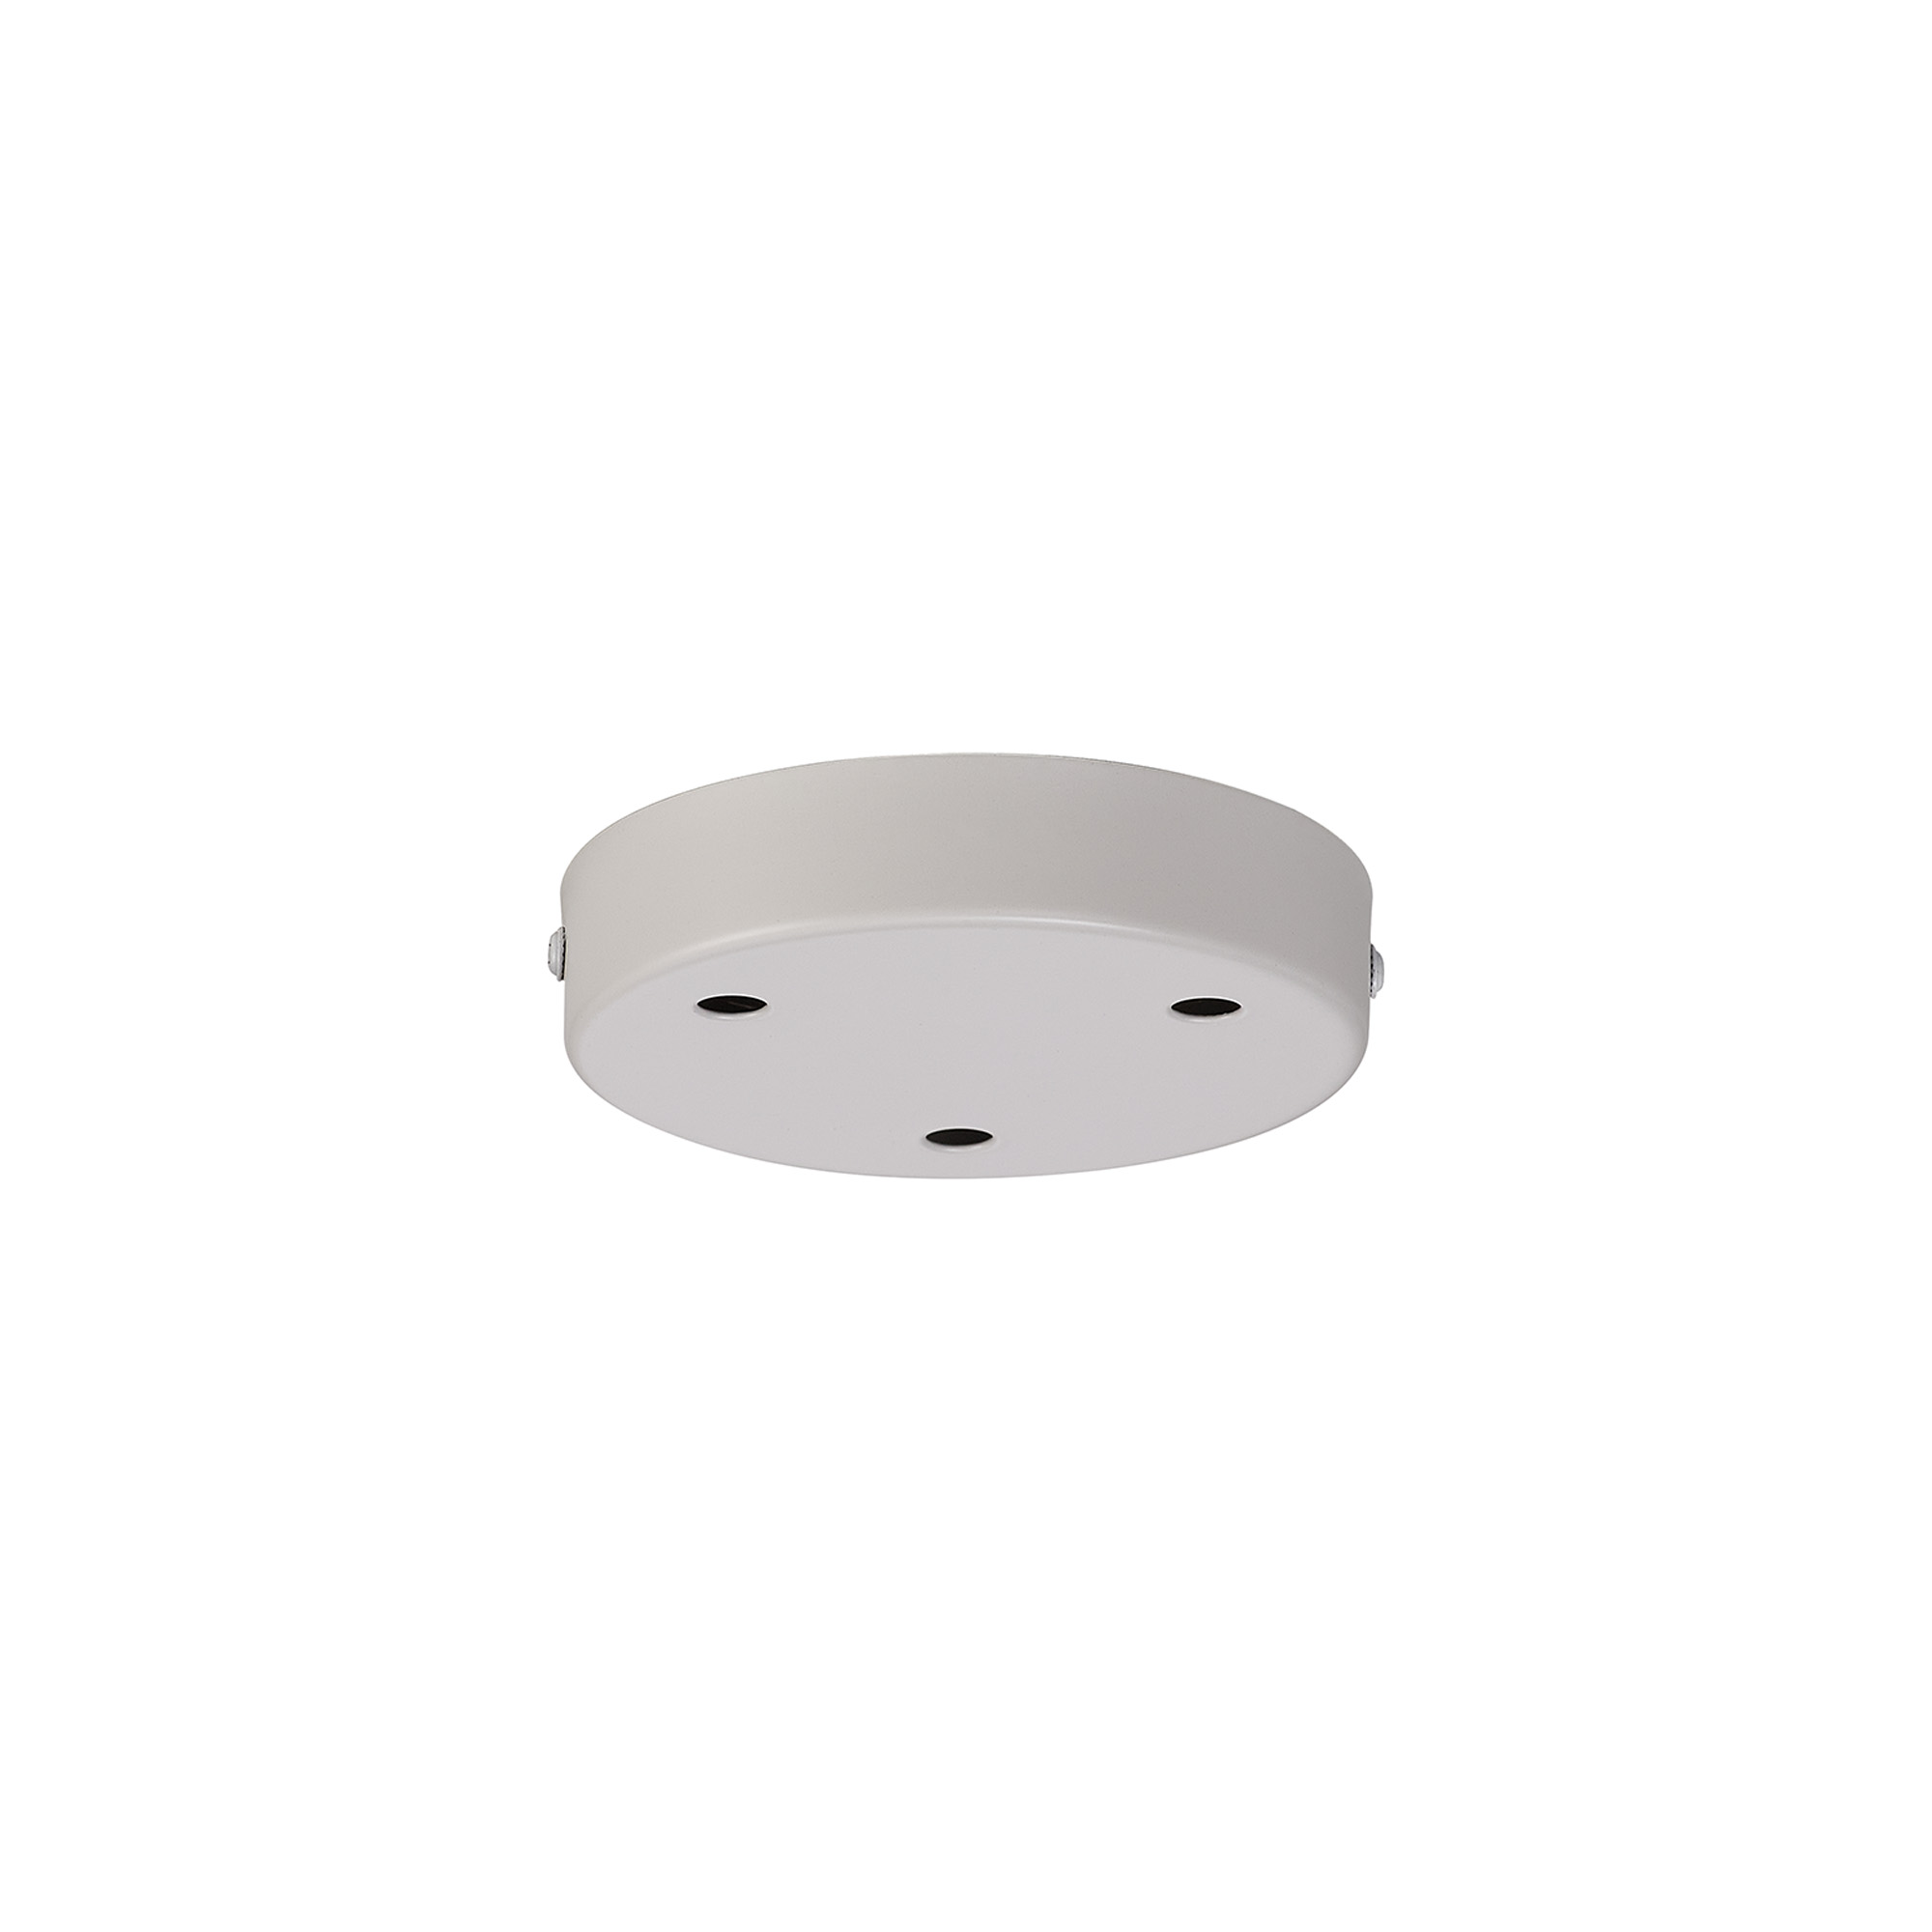 D0827WH  Hayes 3 Hole 12cm Round Ceiling Plate White